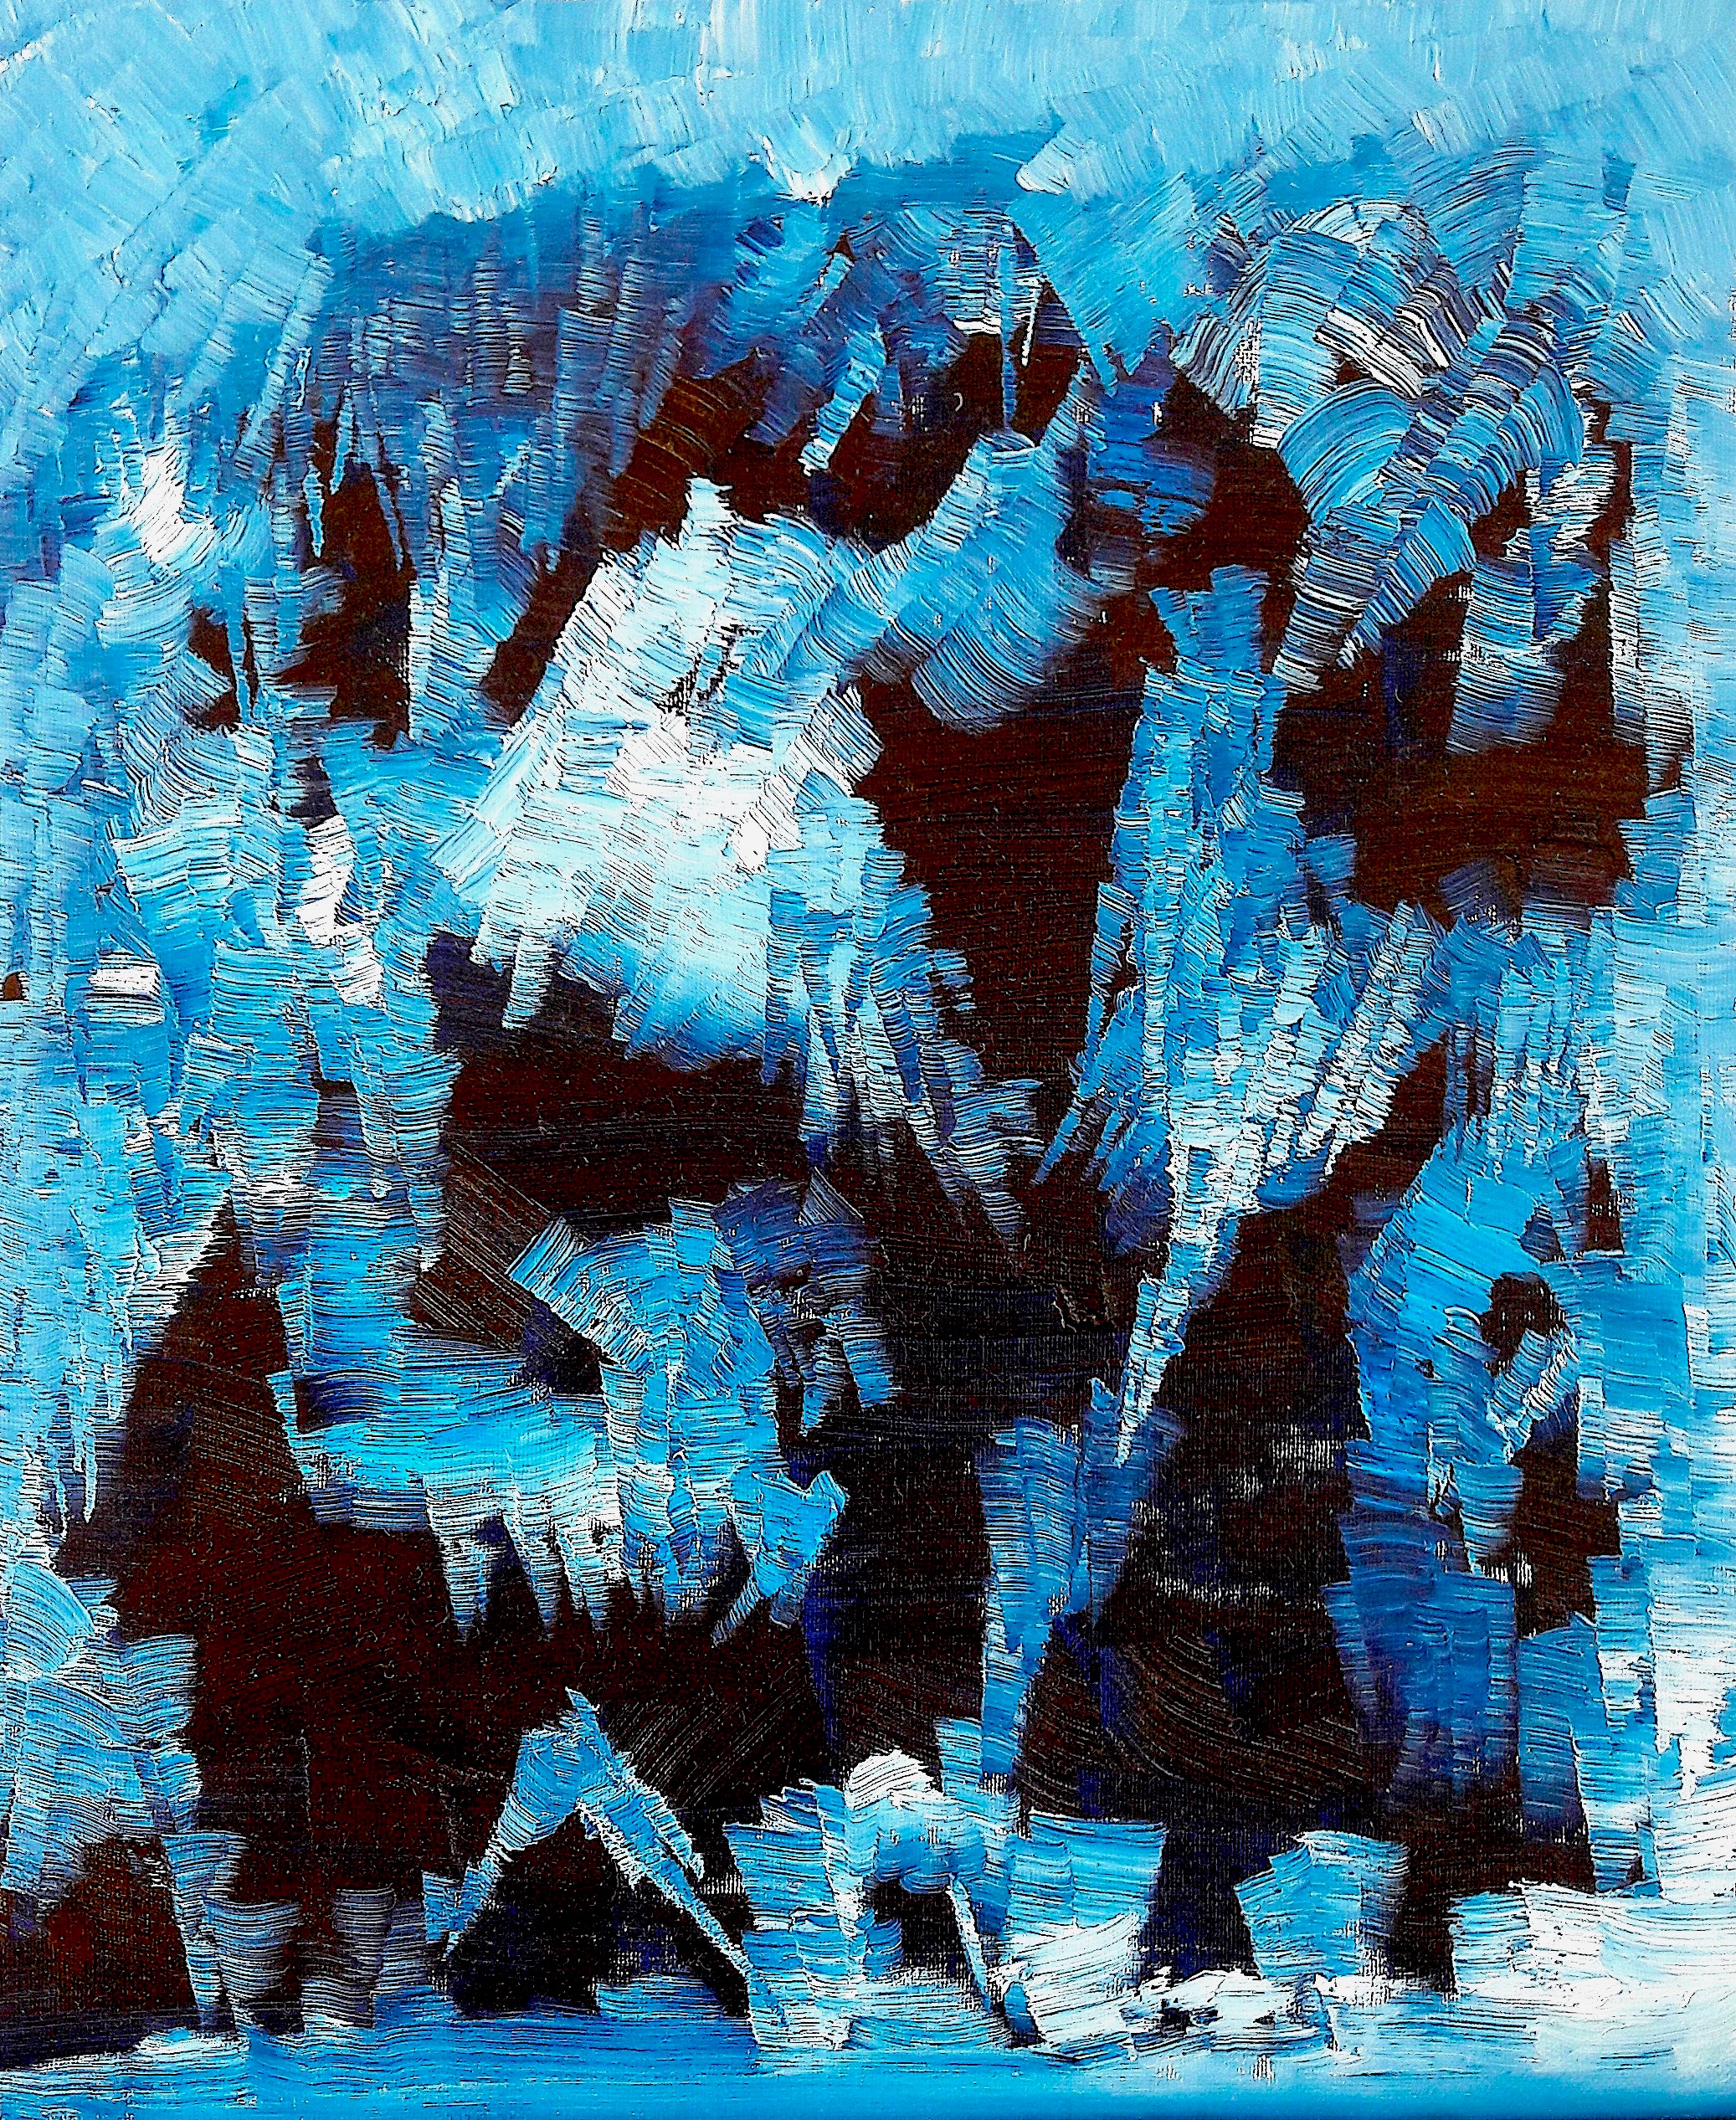 abstract black and blue painting, with shapes evoking the little red riding hood tale, by Samuel Rondiere a.k.a. Sam Elka